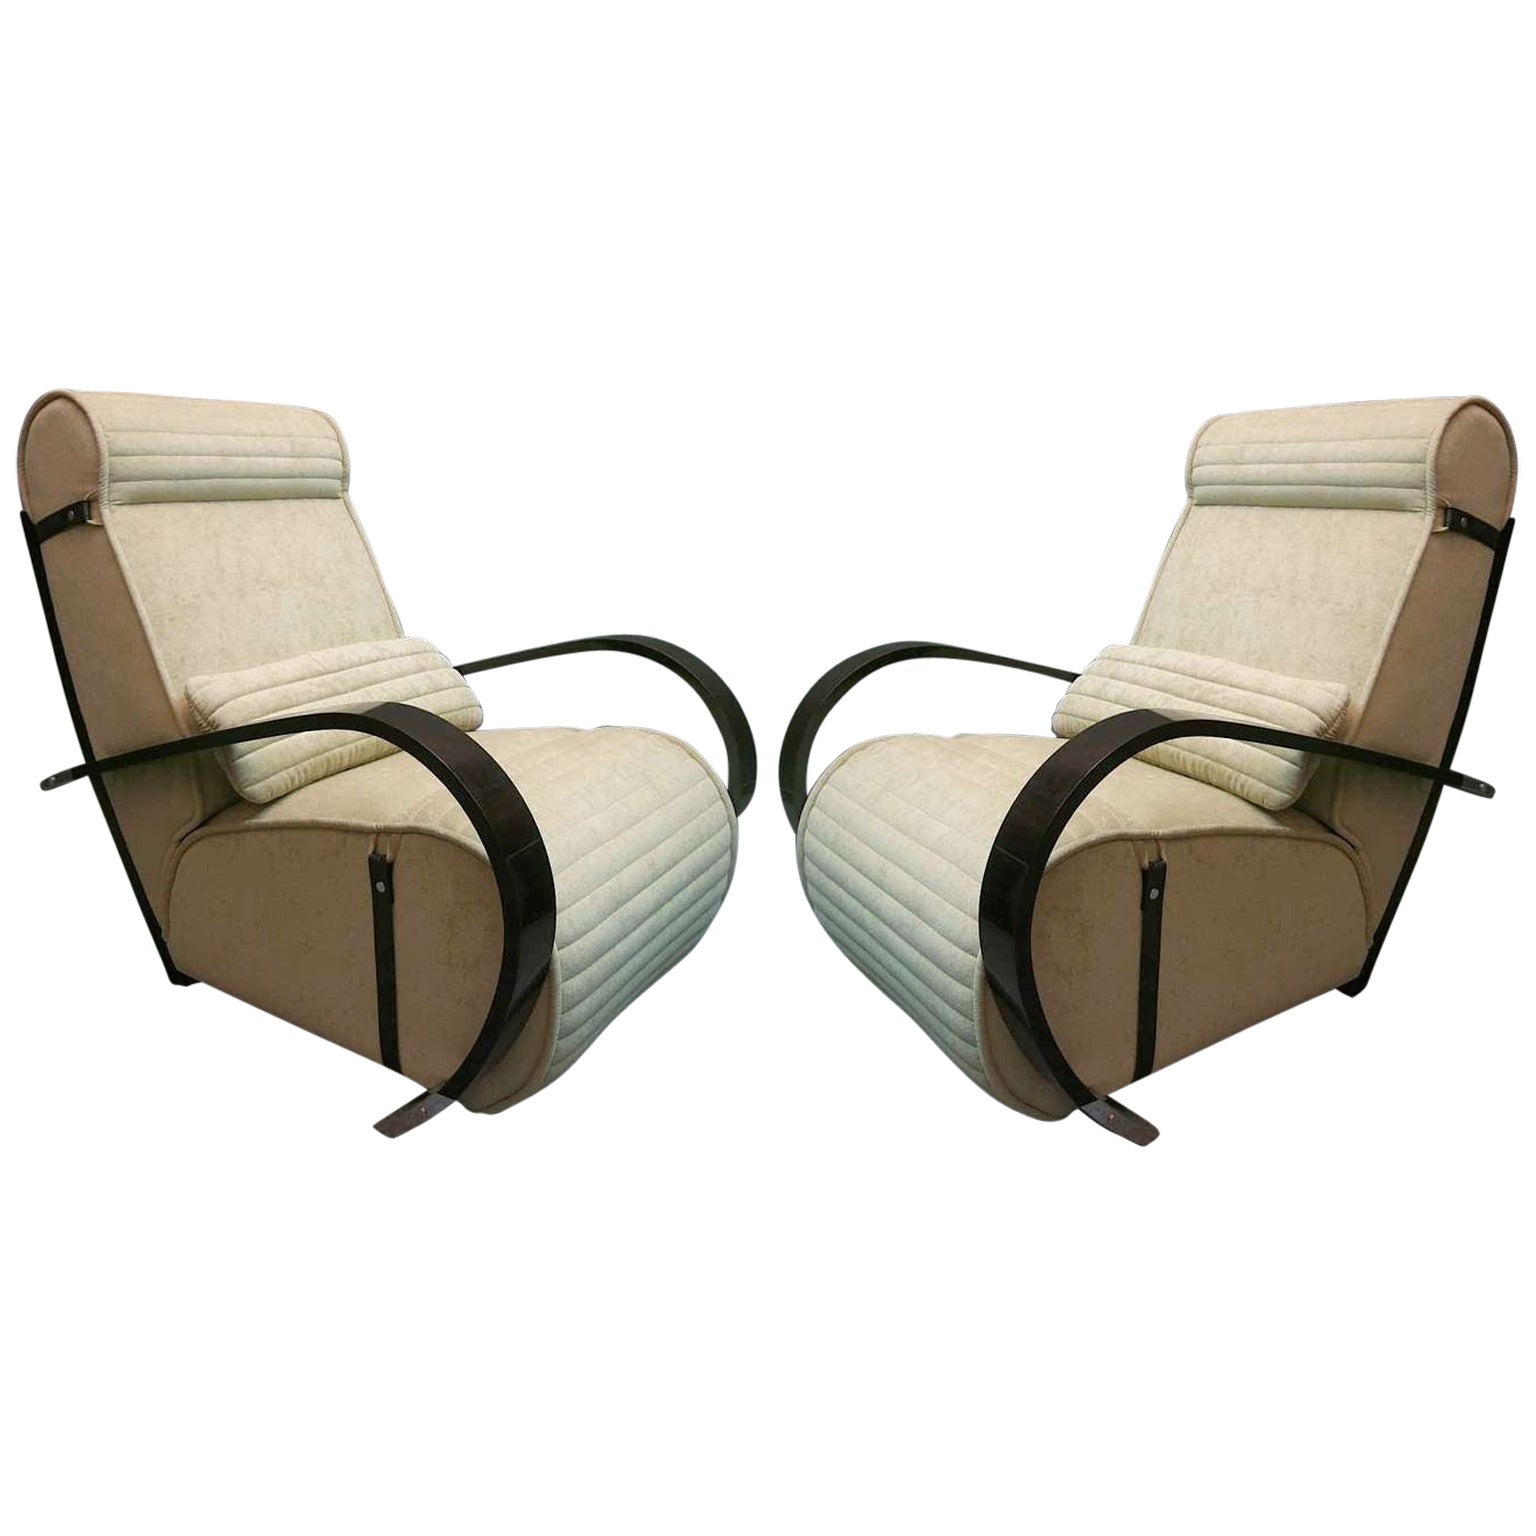 Futuristic design, and pure elegance for a pair of lounge chairs.

All covered in Fine velvet in dove grey color. It has a large rounded seat with transversal stitching in the lower part. The backrest is also covered in fine velvet in dove grey